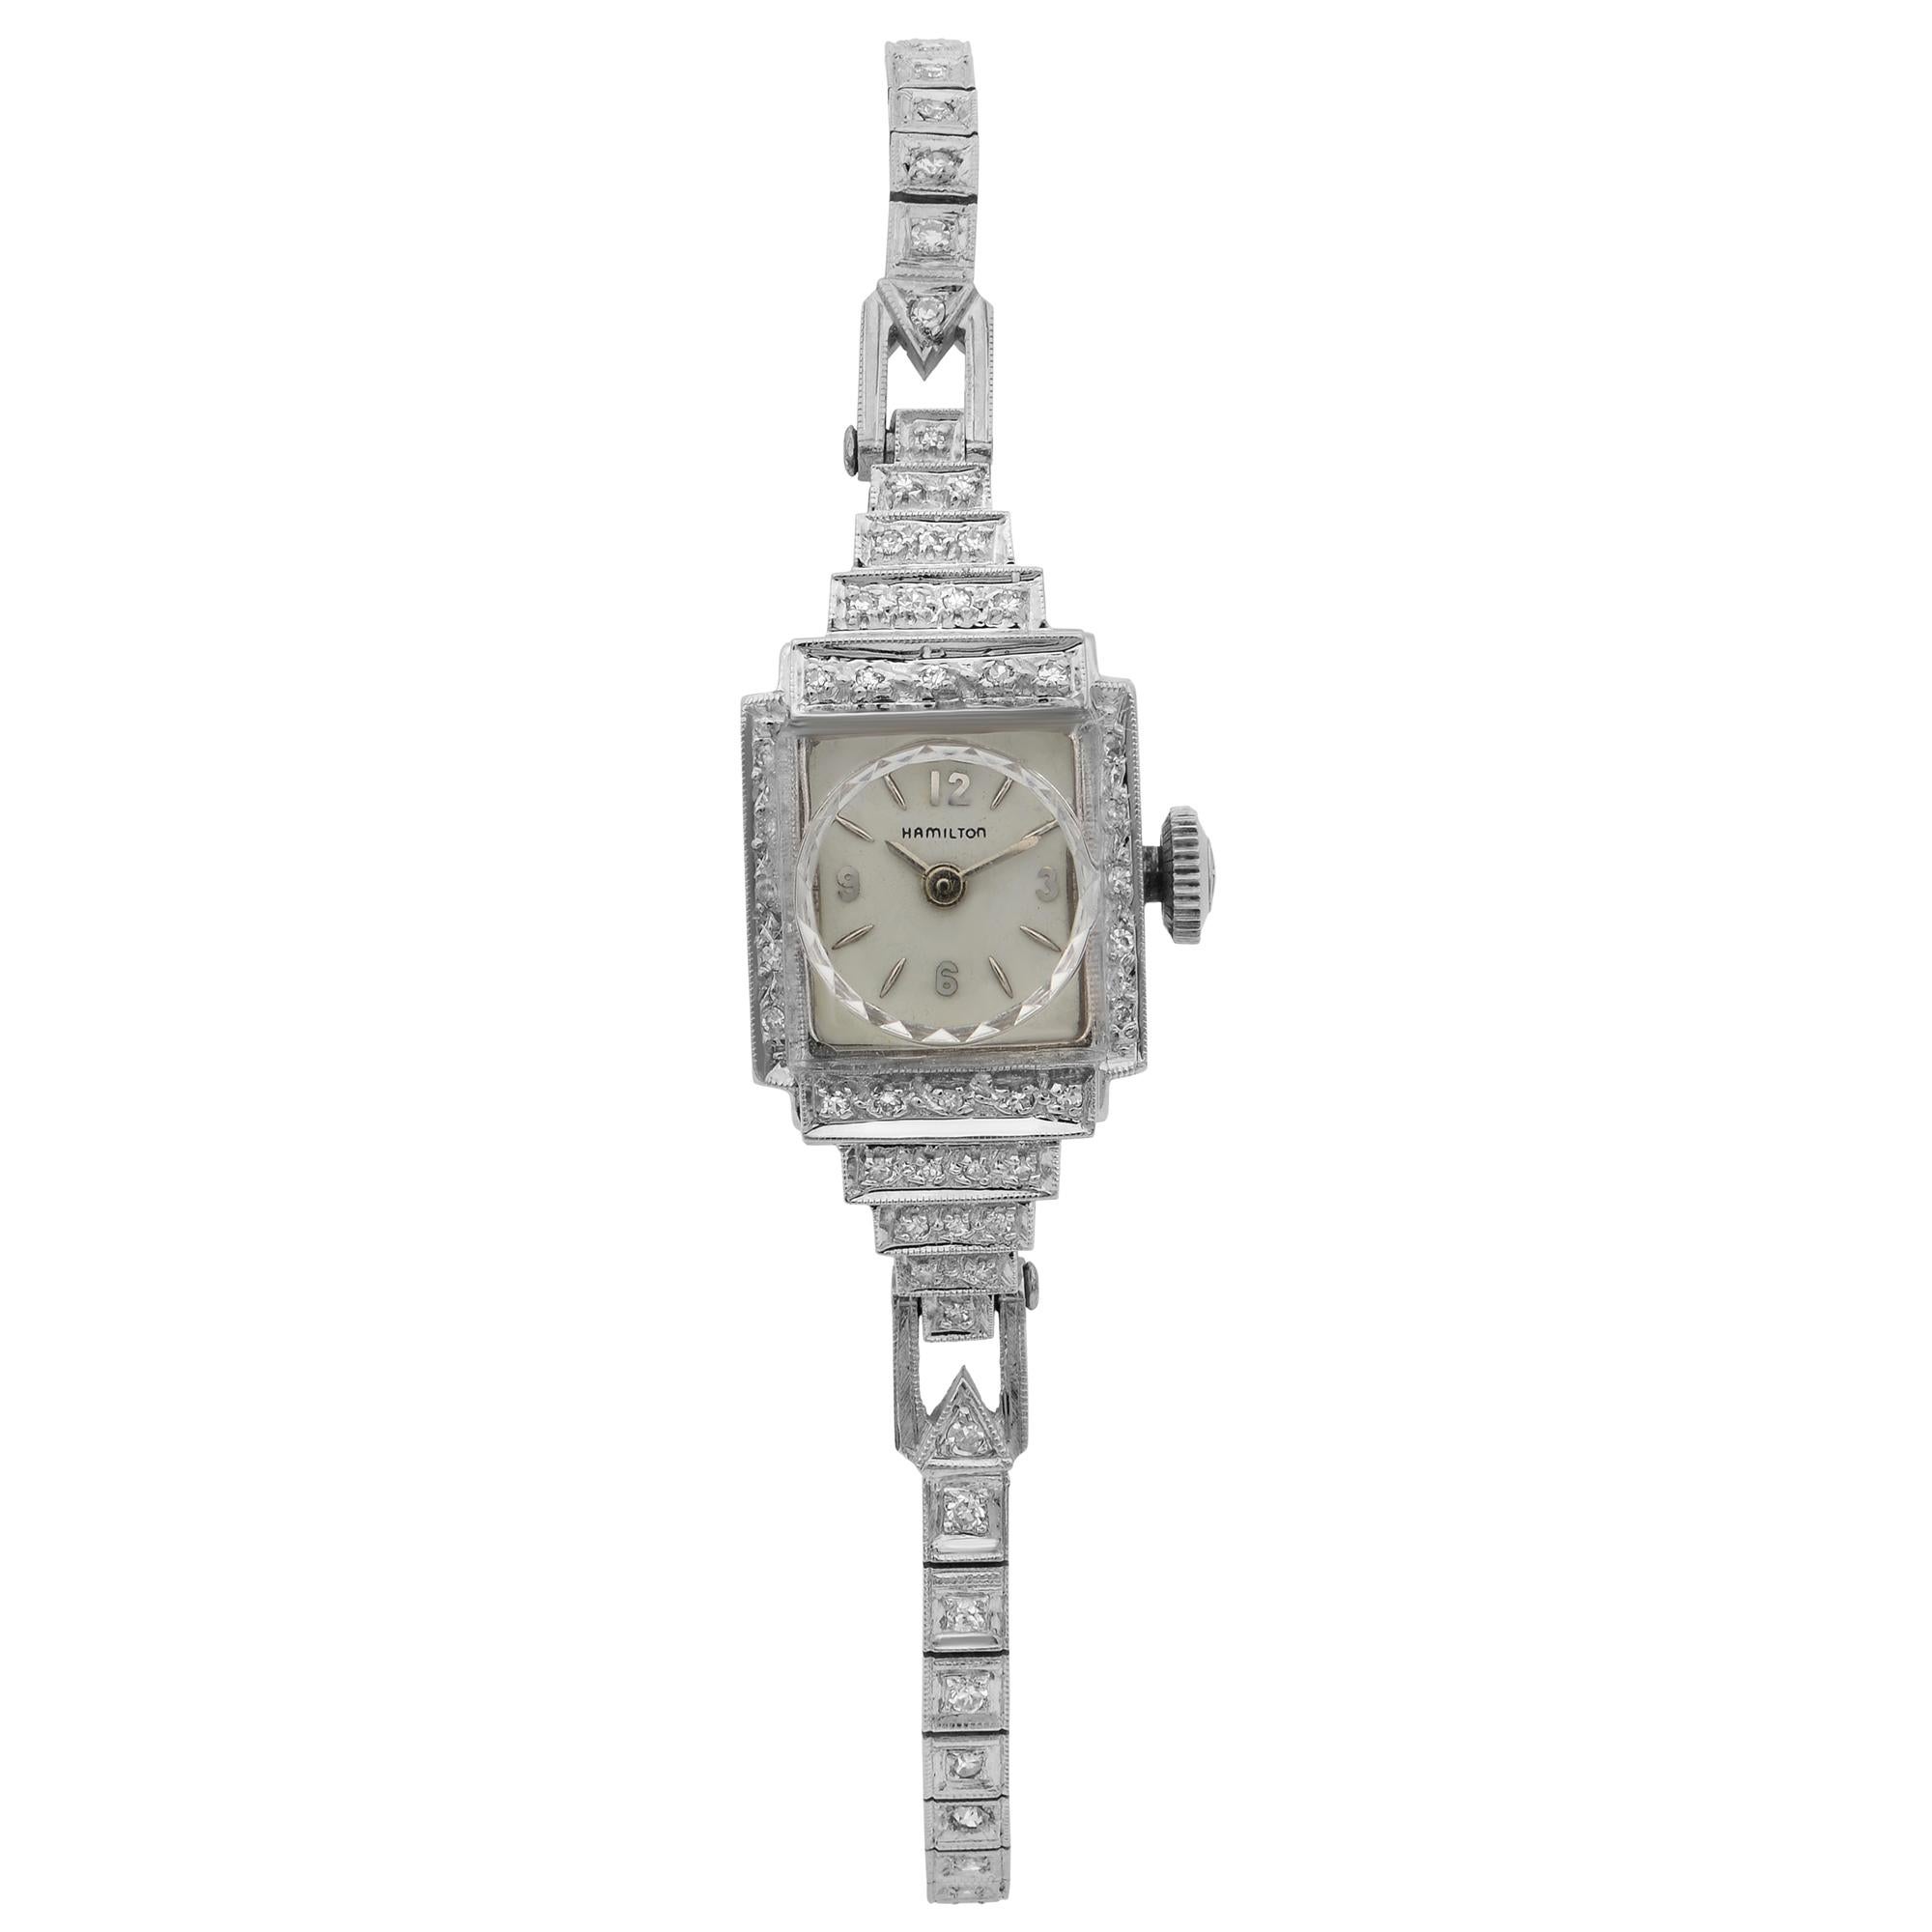 This pre-owned Vintage Hamilton 14 Karat White Gold Silver Dial Quartz Ladies' timepiece is powered by quartz (battery) movement which is cased in a white gold case. It has a square shape face, no features dial, and has hand sticks & numerals style